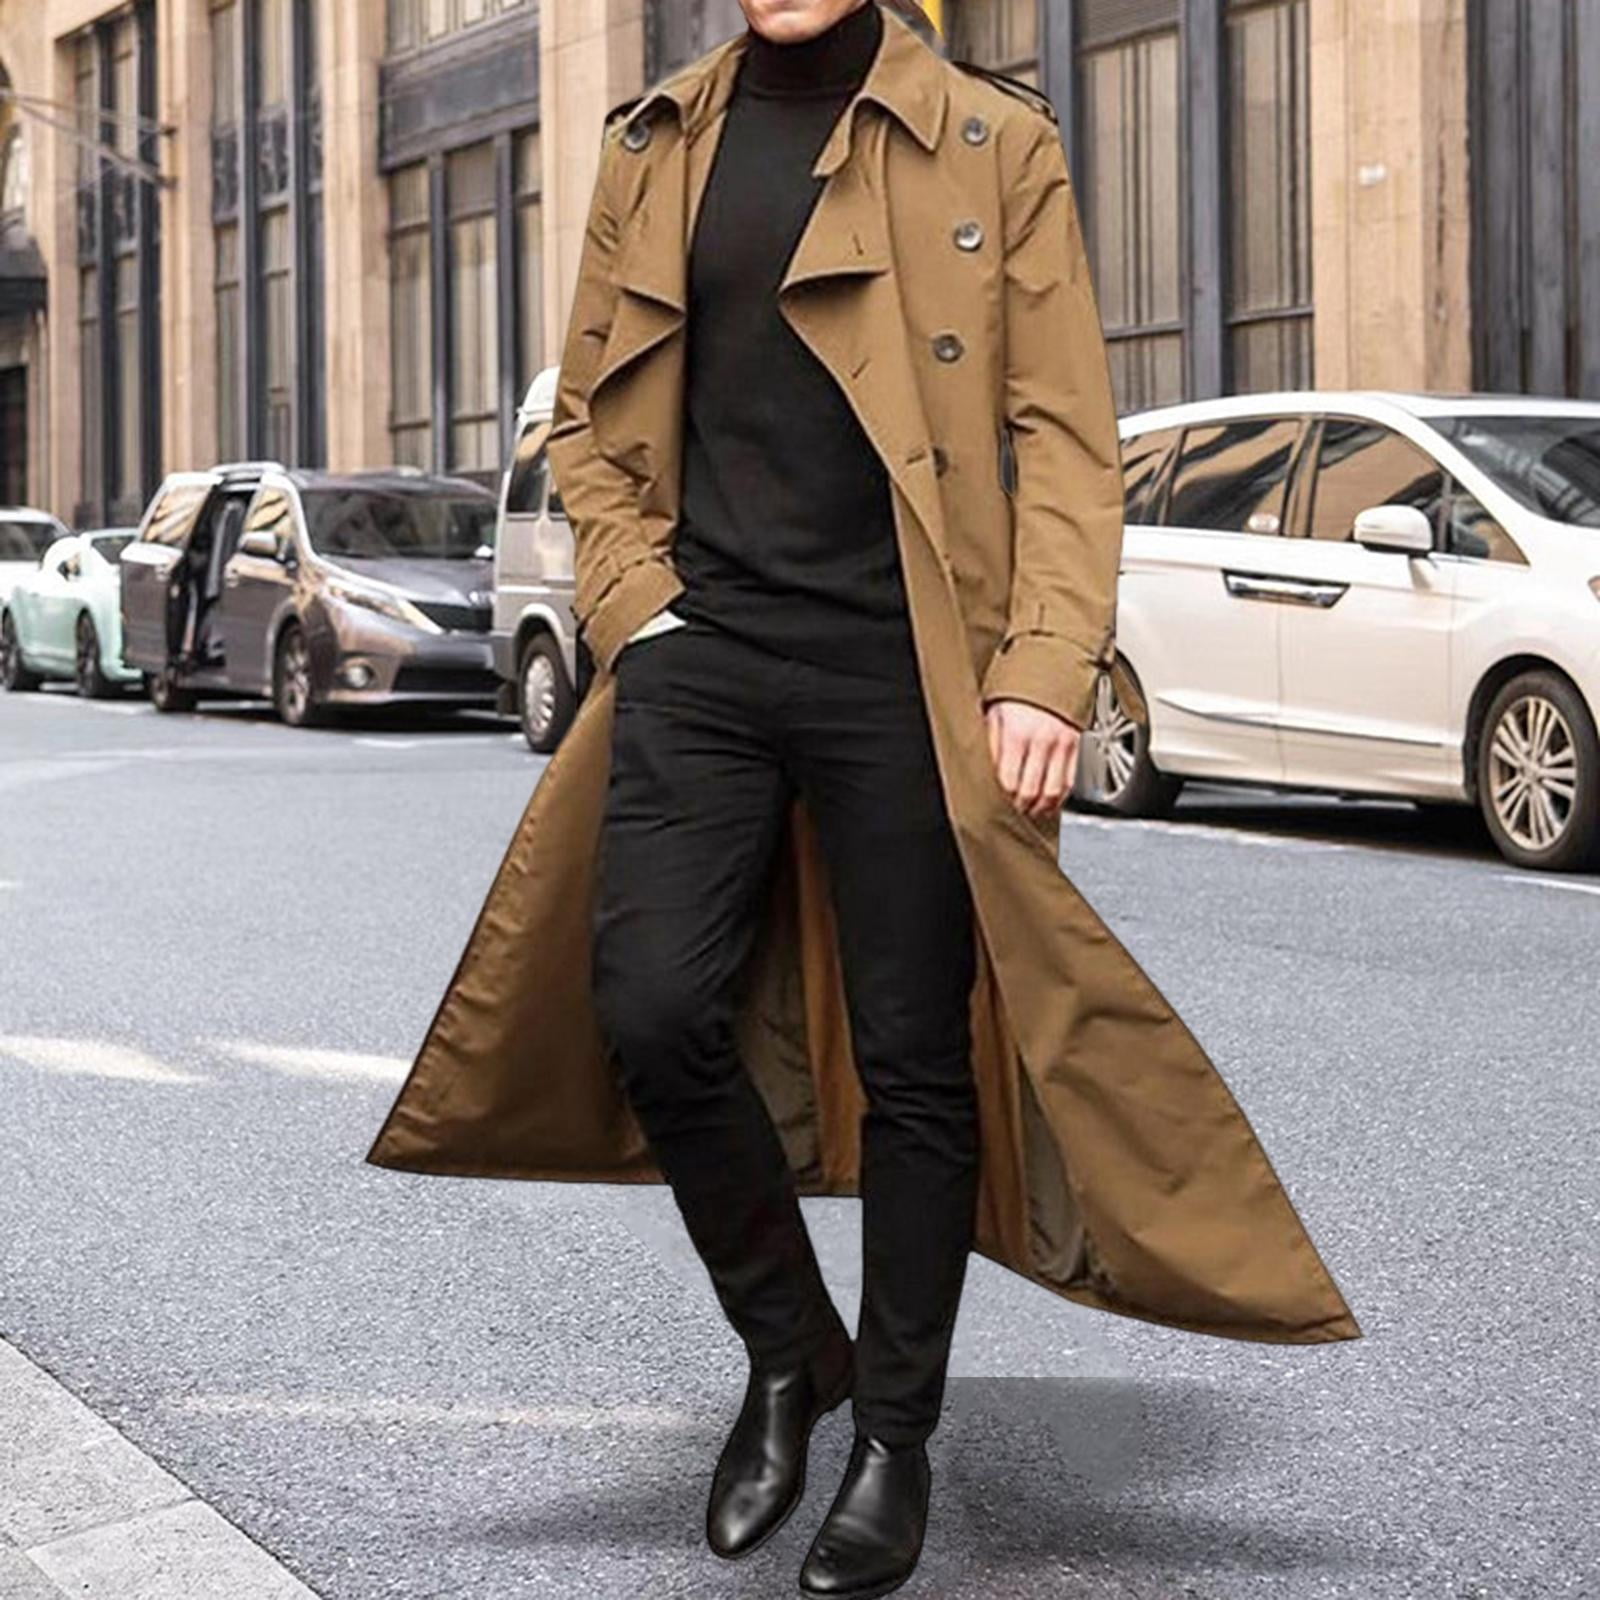 Formal Men'trench Coat Peacoat with Pockets Fashion Top Double Breasted ...